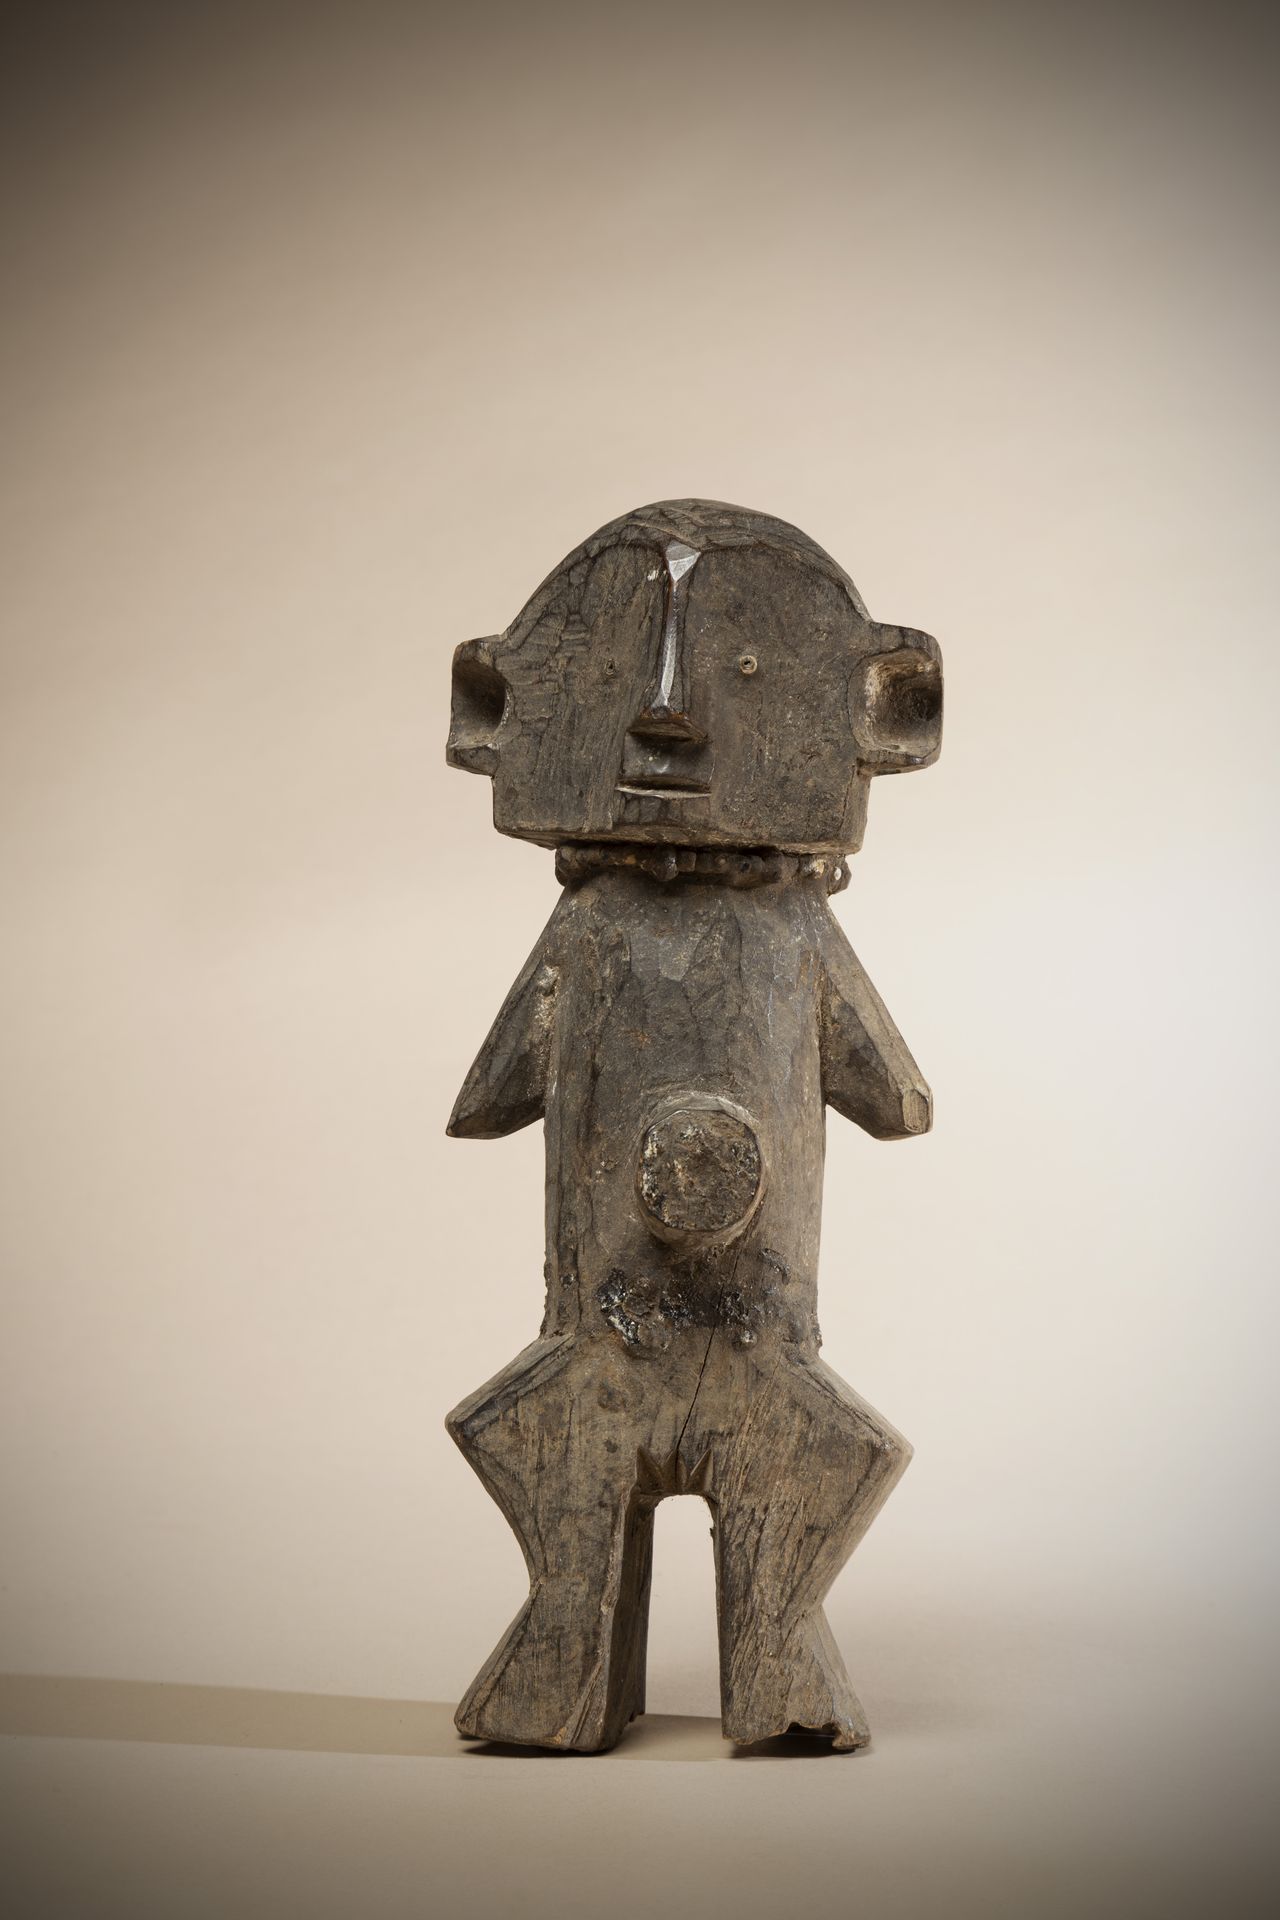 Null ZANDE (Congo DRC)

Female statue with a protruding cylindrical navel. The l&hellip;